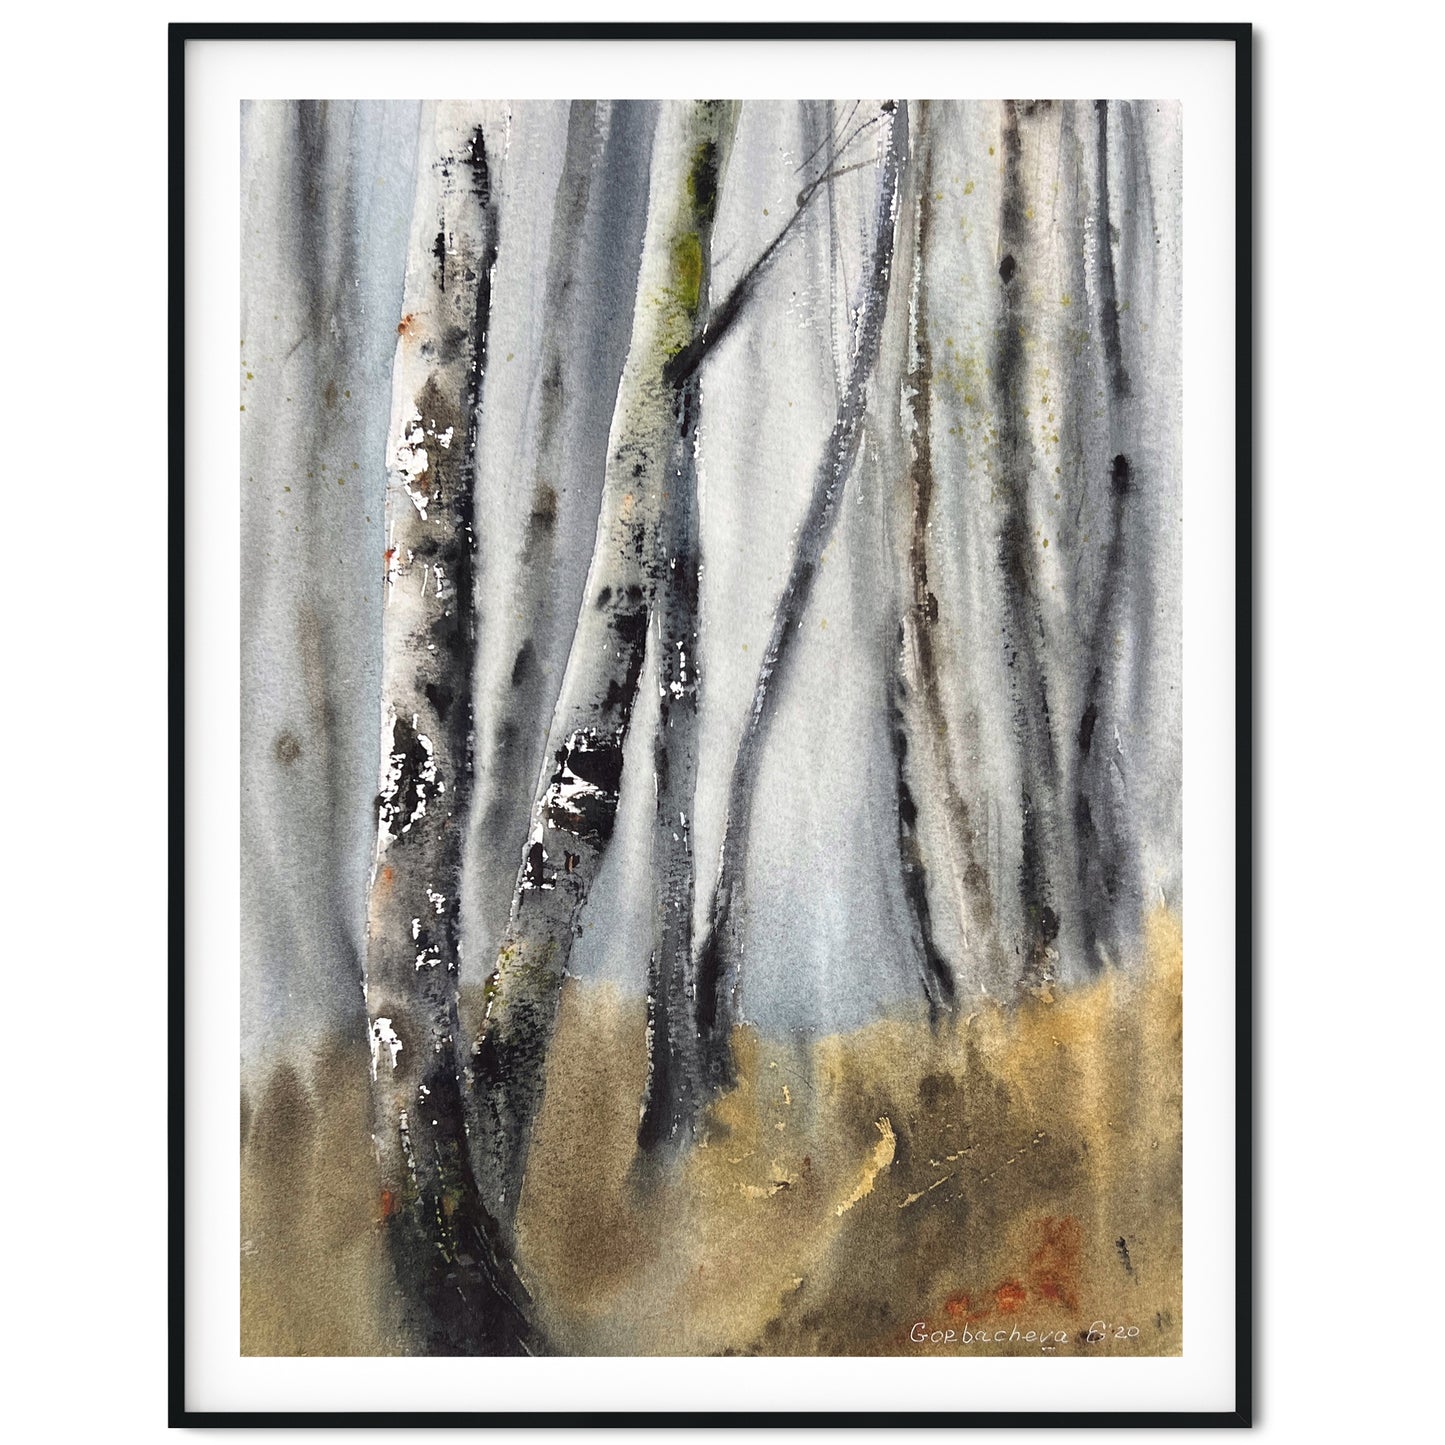 Birch Forest Original Watercolor Painting, Nature Wall Art, Autumn trees, Scenery Landscape Artwork